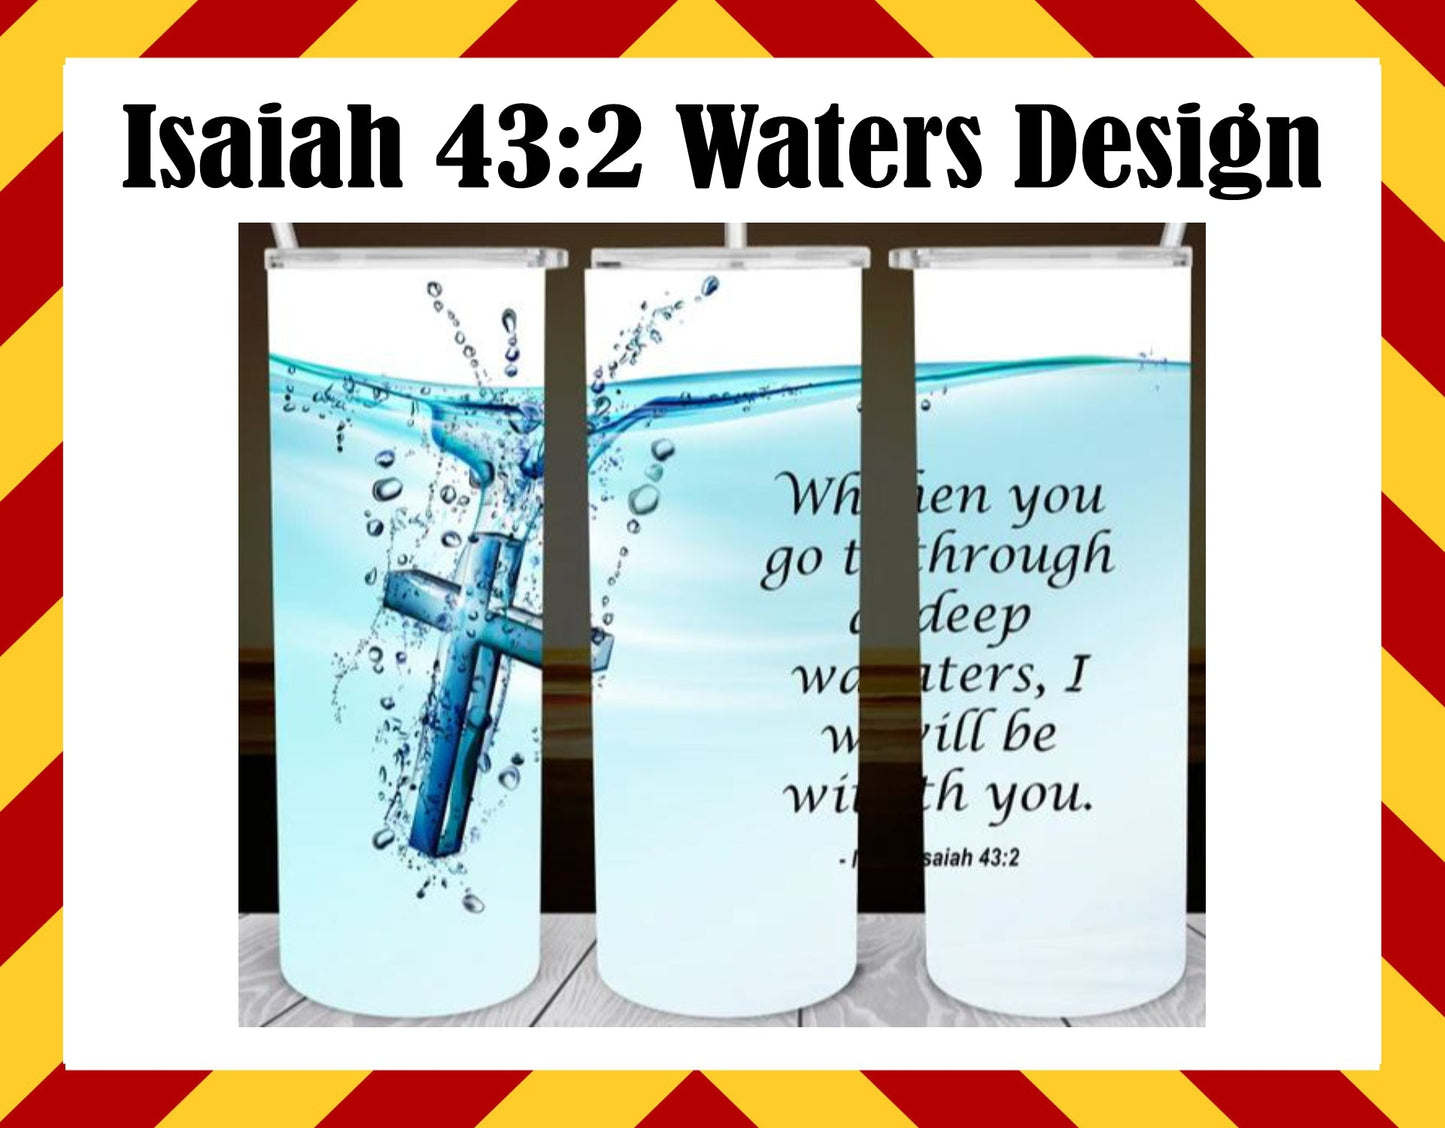 Stainless Steel Cup - Isaiah 43:2 Waters Design Hot/Cold Cup